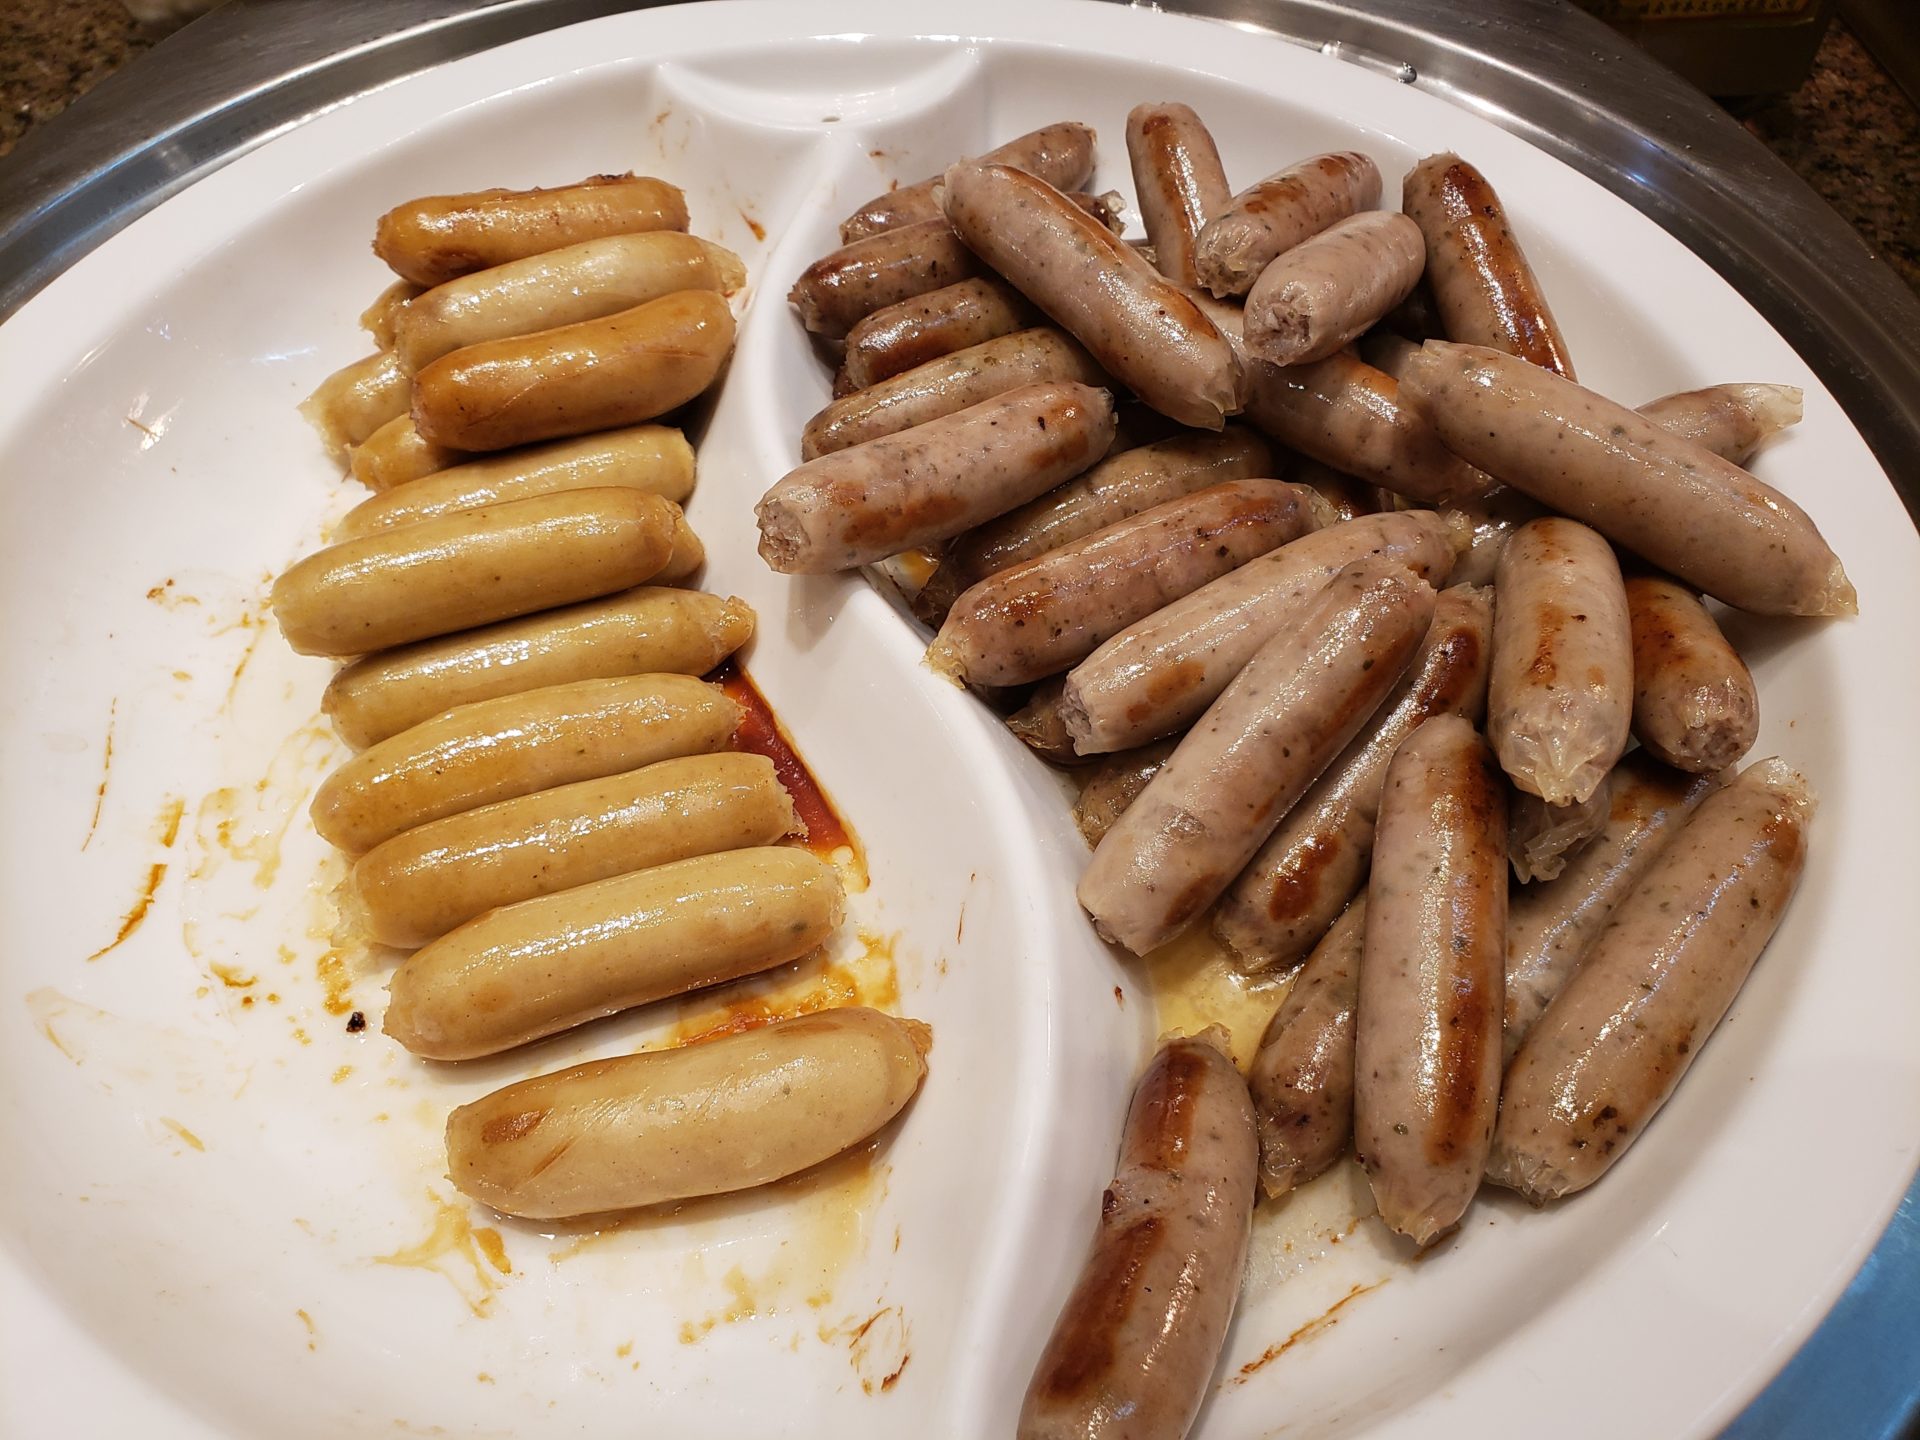 a plate of sausages and sausages